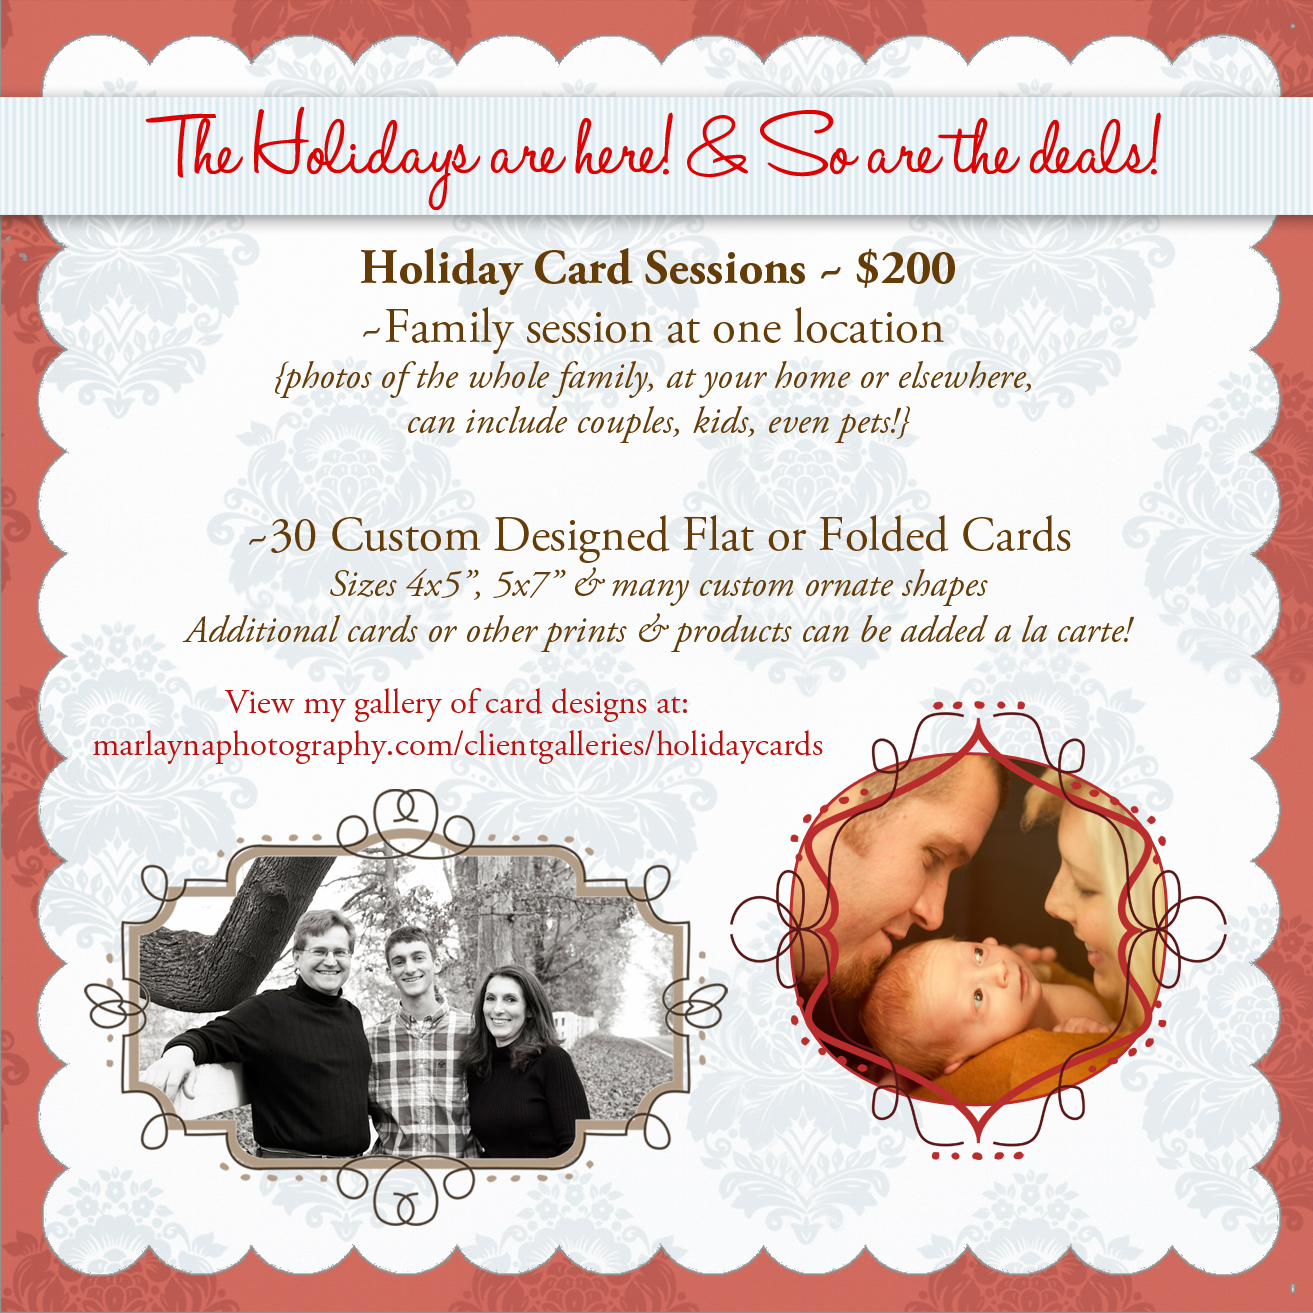 Holiday Card Special 200 dollar sessions with 30 cards